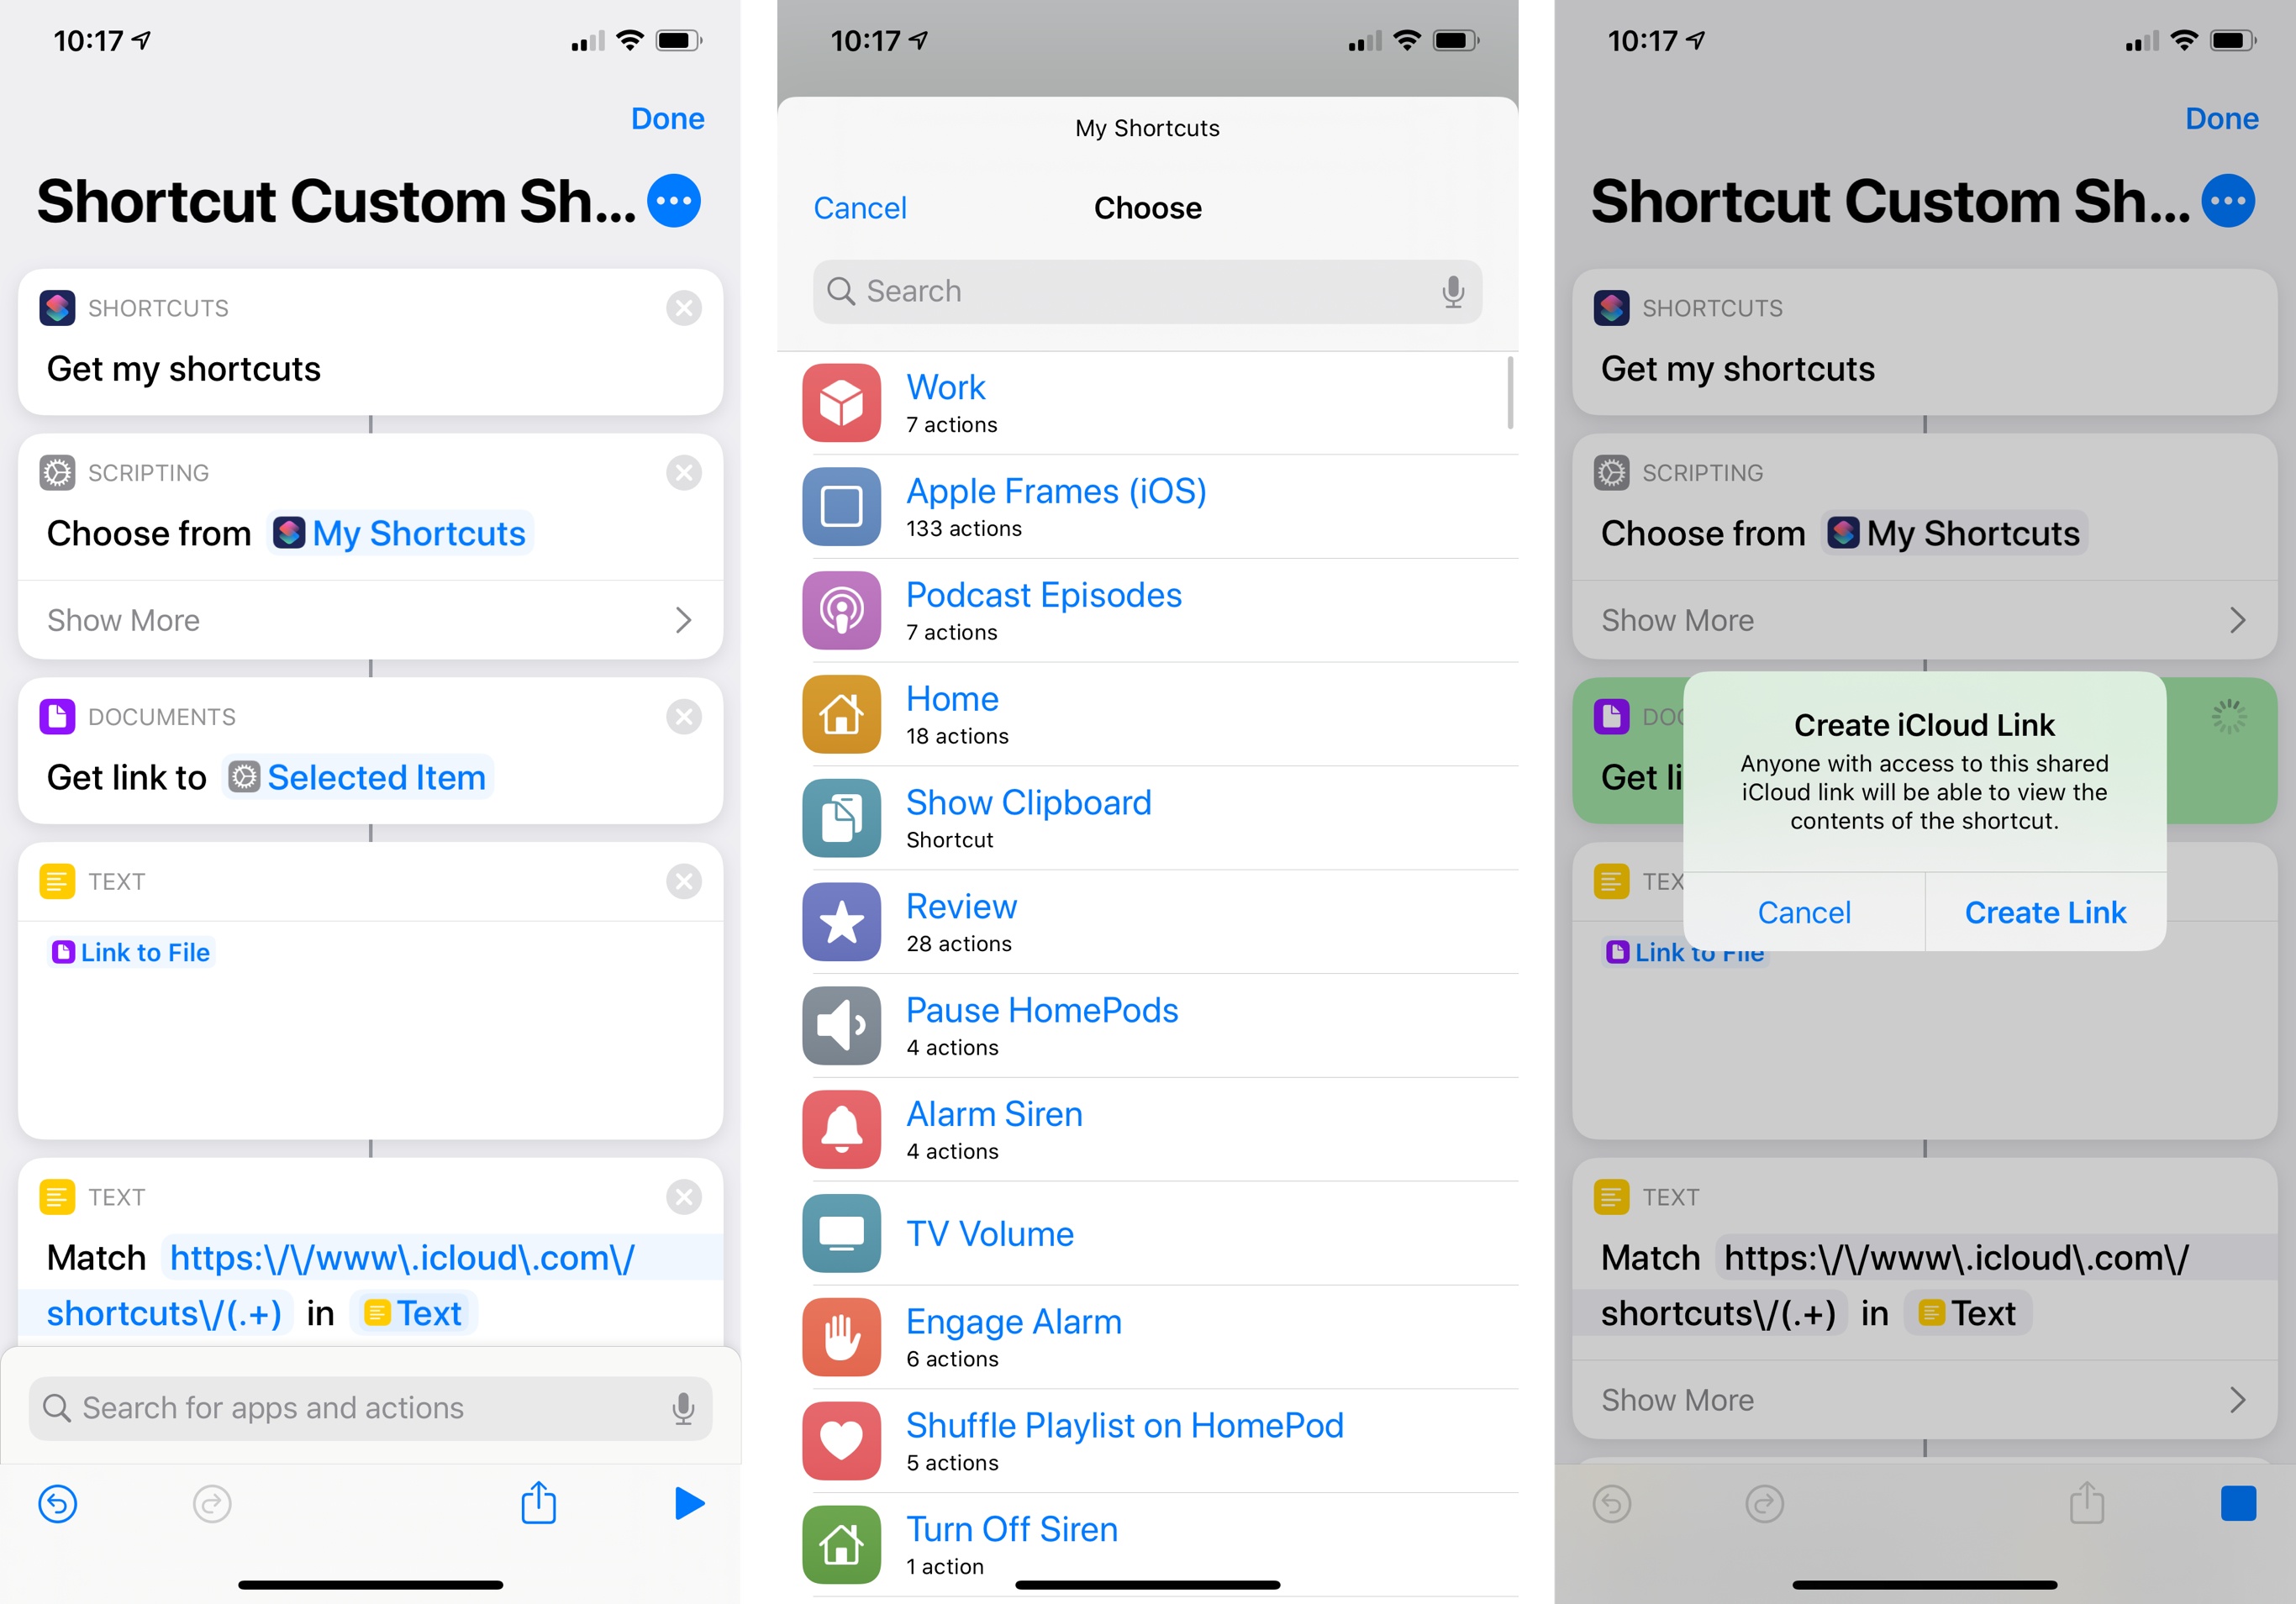 Automating shortcut sharing in iOS 13.1.